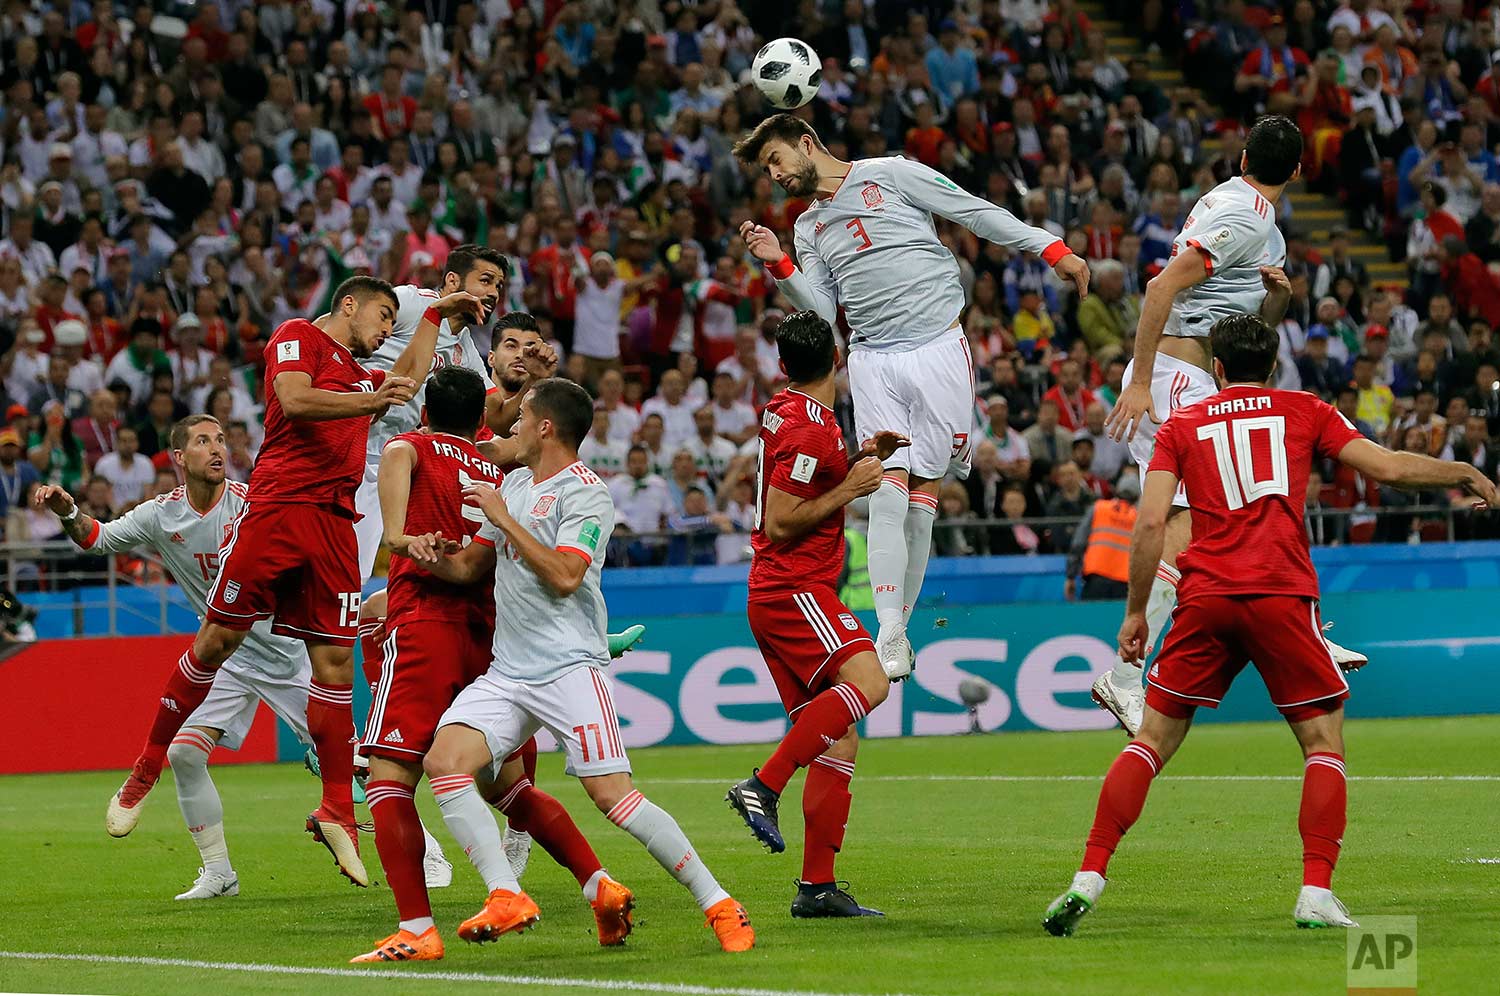  Spain's Gerard Pique, center, jumps for a header during the group B match between Iran and Spain at the 2018 soccer World Cup in the Kazan Arena in Kazan, Russia, Wednesday, June 20, 2018. (AP Photo/Manu Fernandez) 